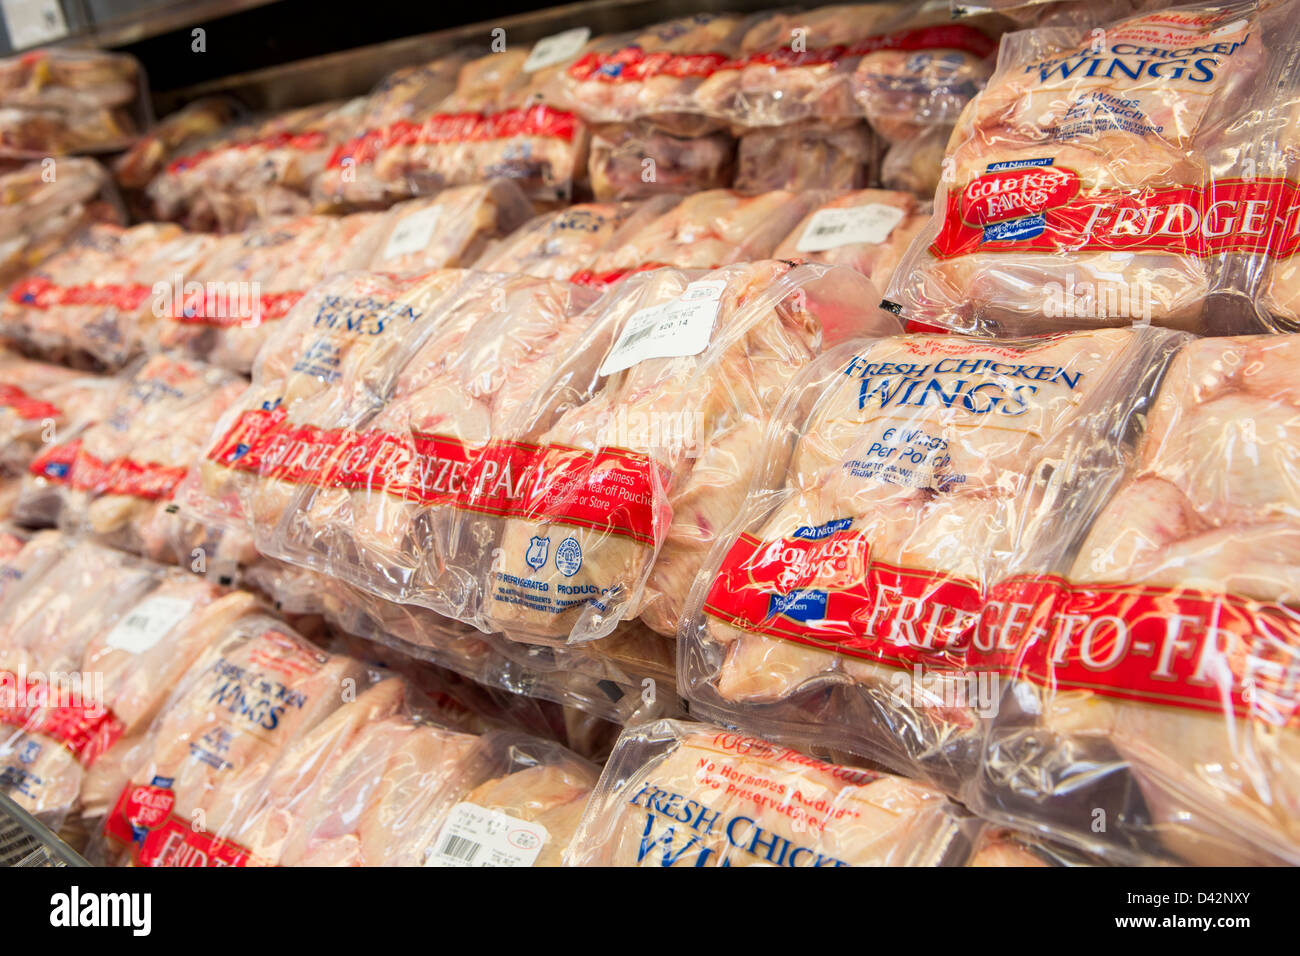 Chicken wings on display at a Costco Wholesale Warehouse Club Stock Photo -  Alamy